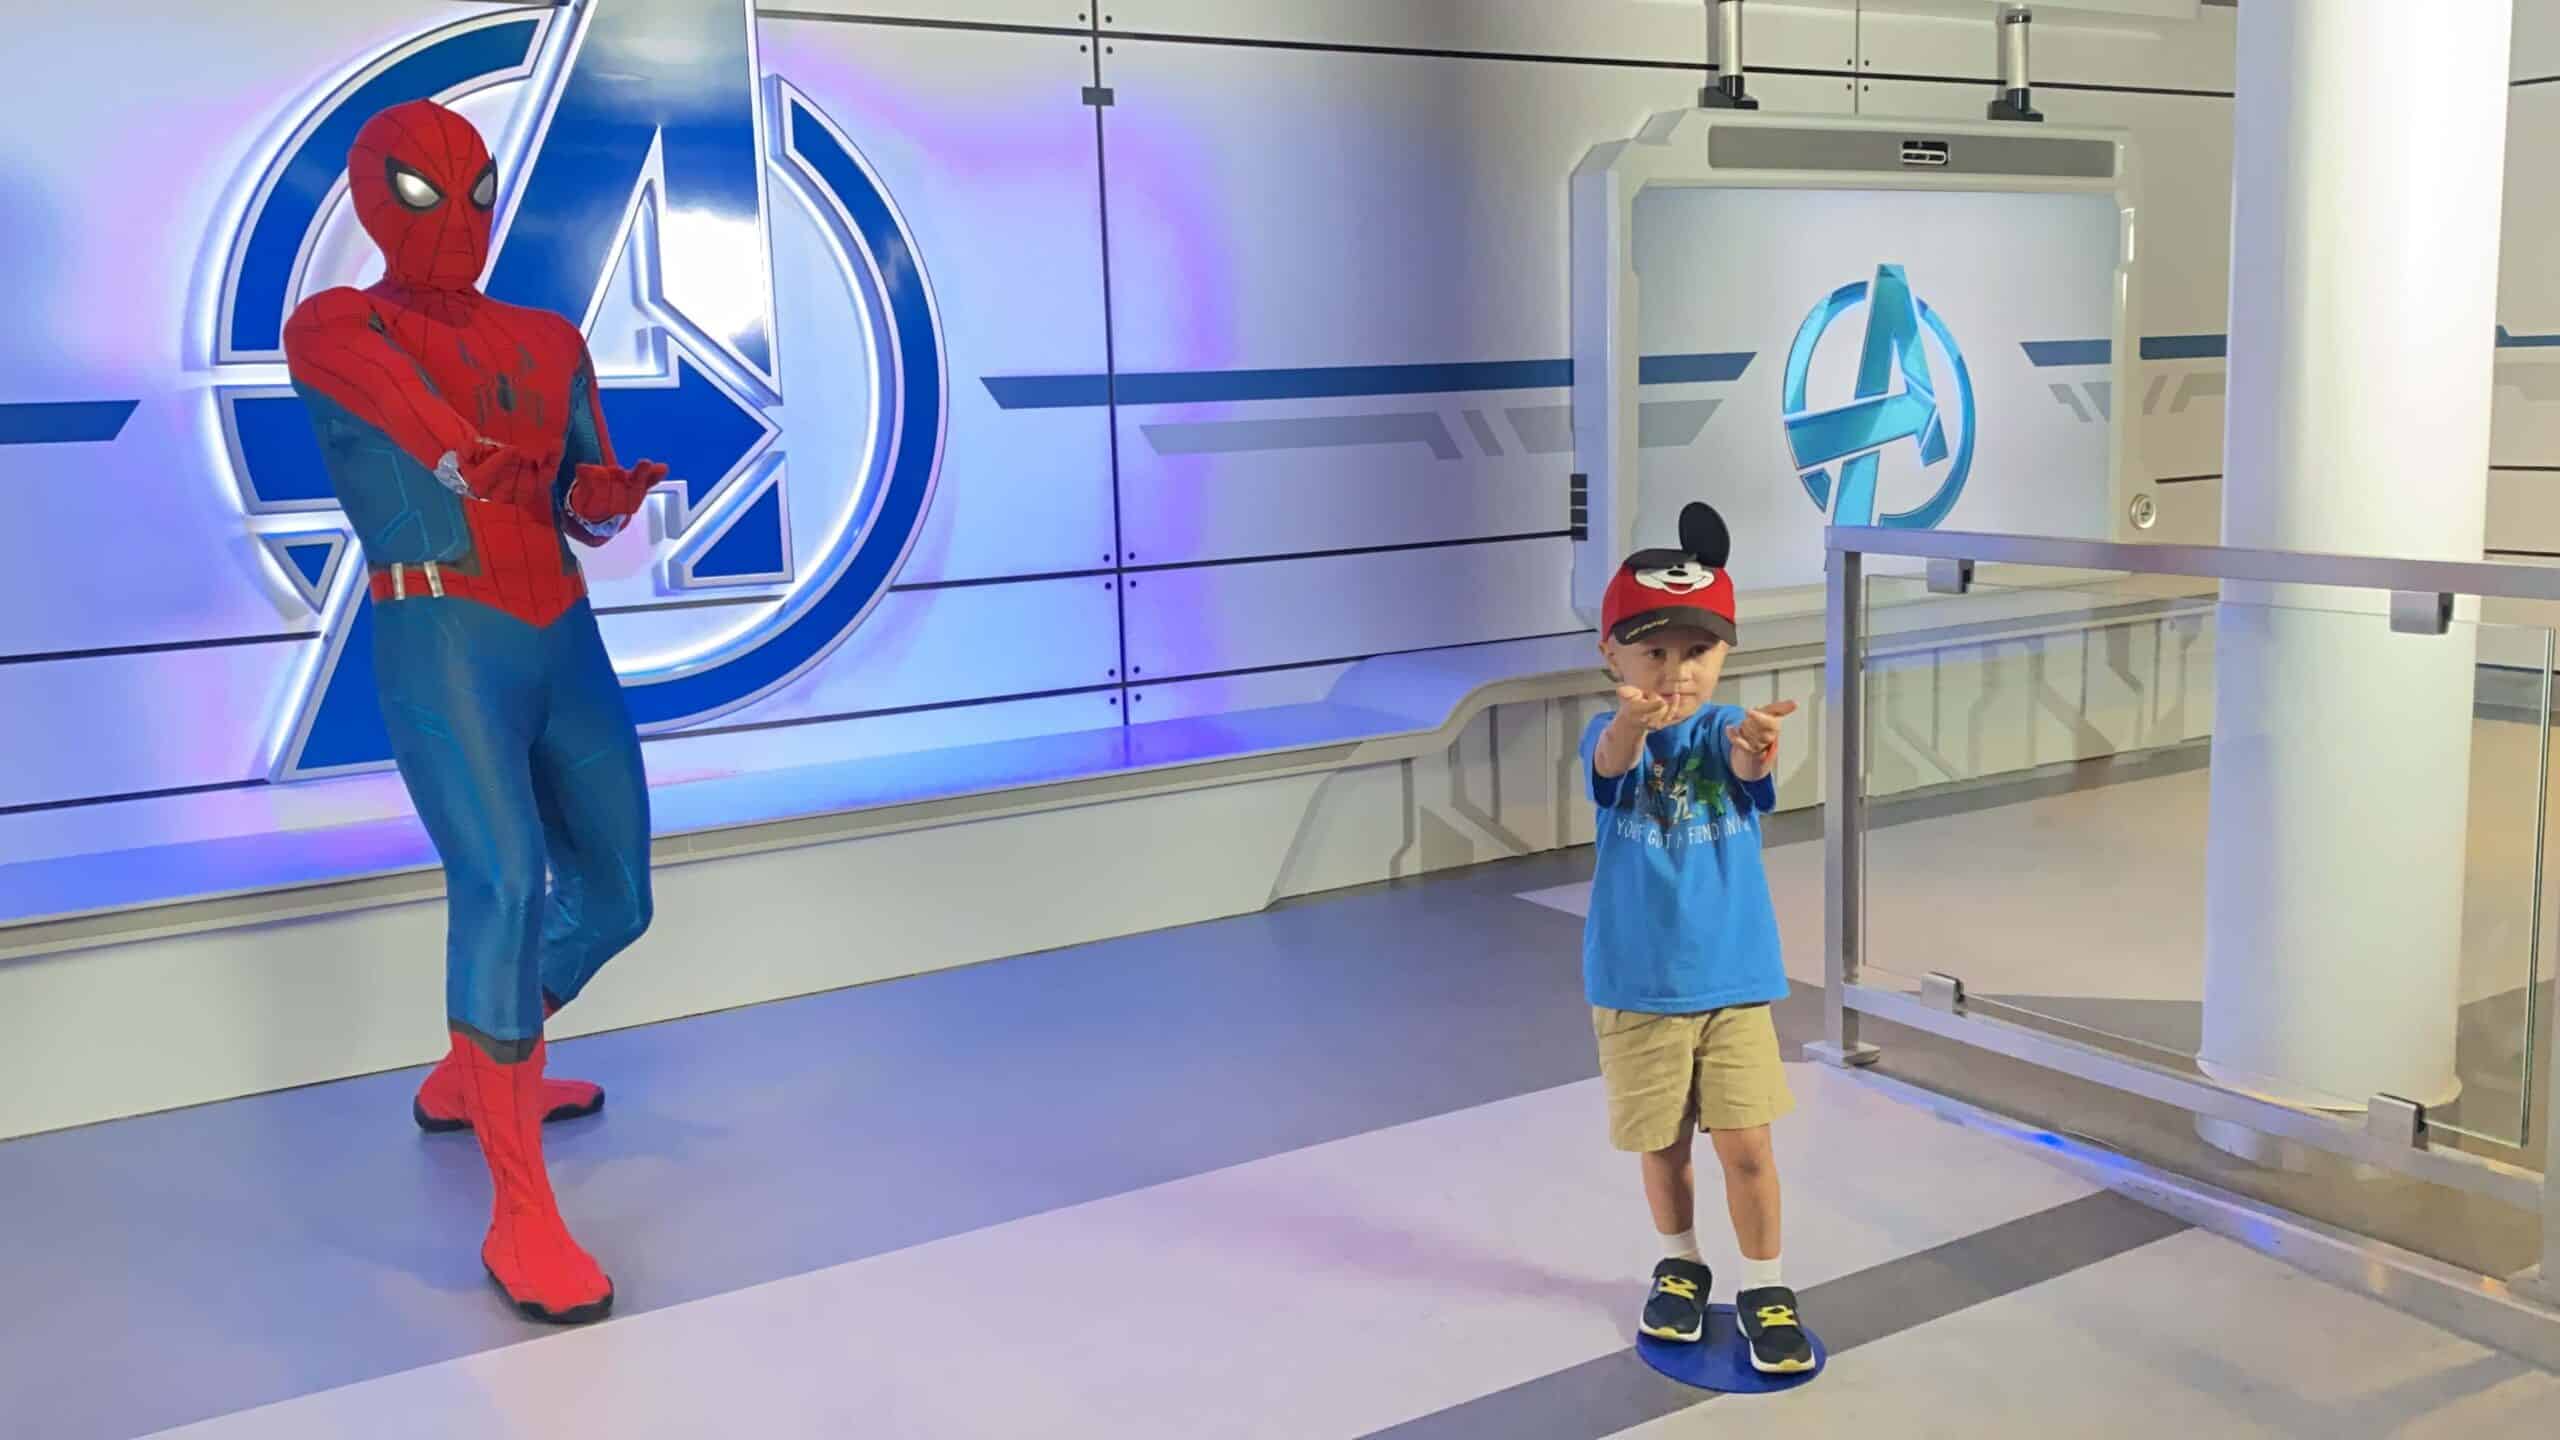 Spider-Man Character Greeting on Disney Wish, Spider-Man poses with four year old boy in an Avengers themed room